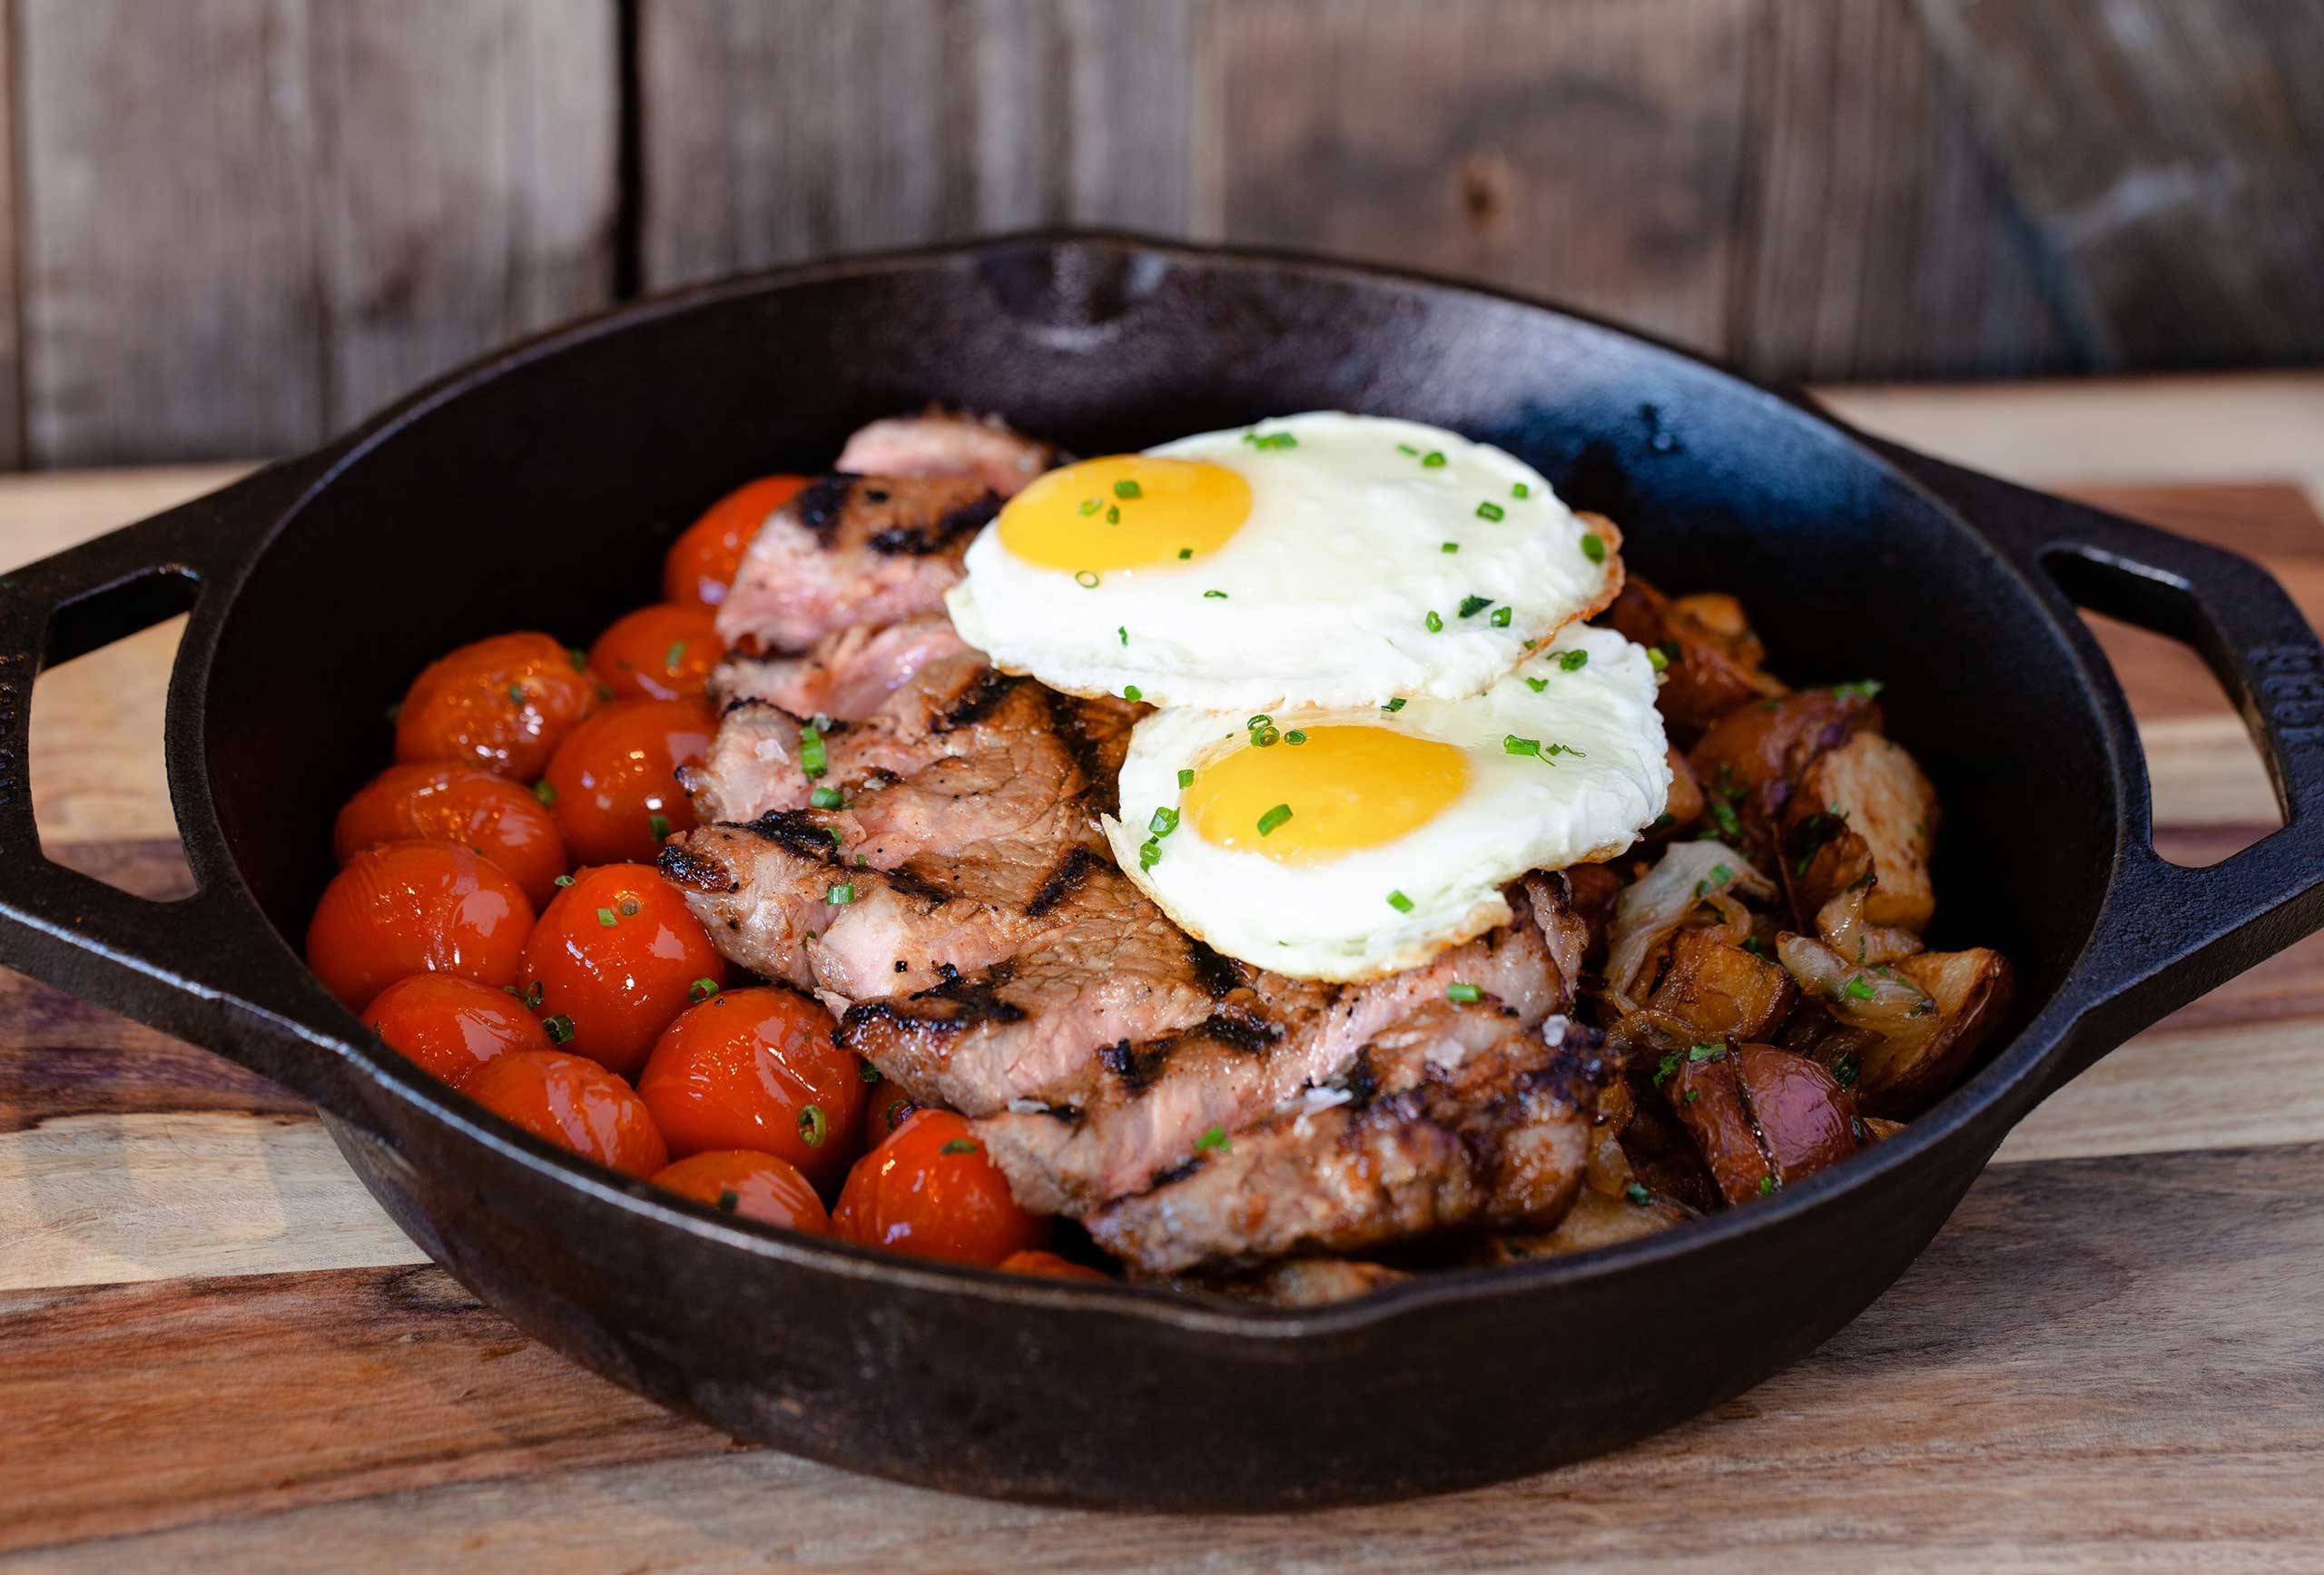 Weekend Brunch at House of Blues - NY Steak & Eggs